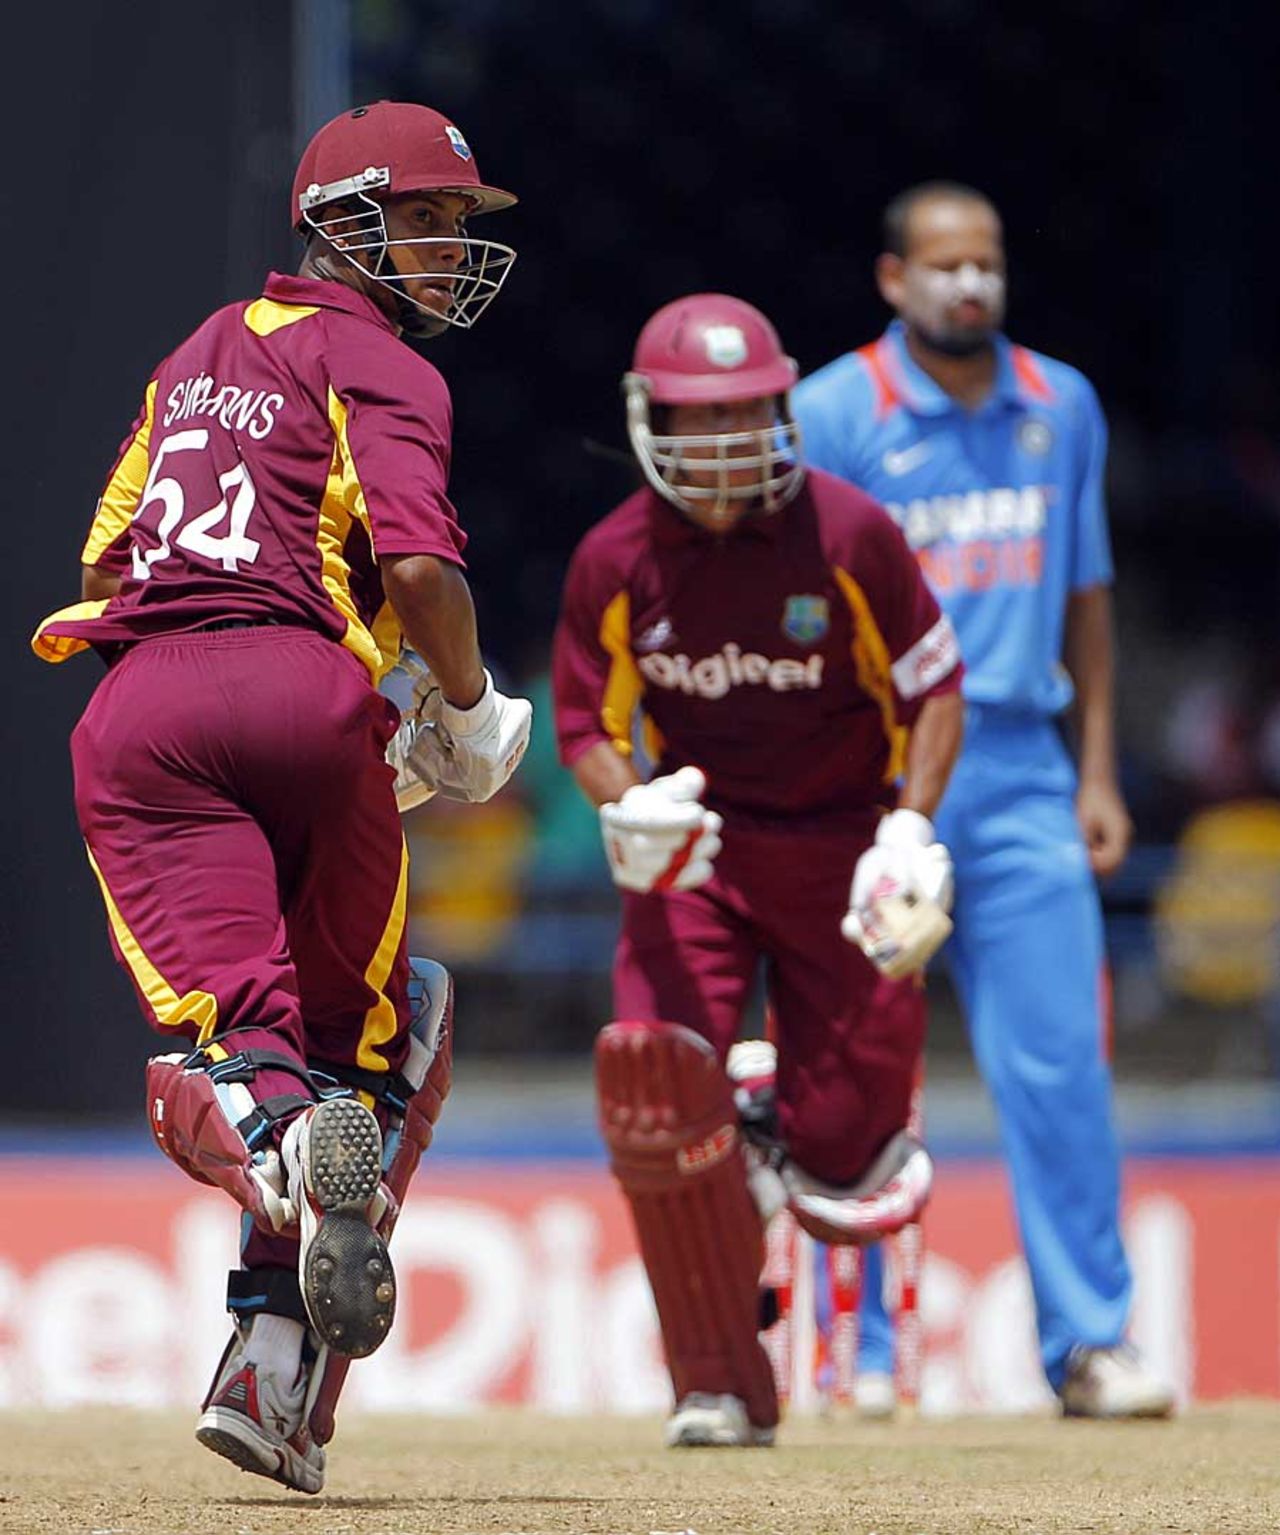 Lendl Simmons and Ramnaresh Sarwan added 67 for the second wicket, West Indies v India, 2nd ODI, Trinidad, June 8, 2011